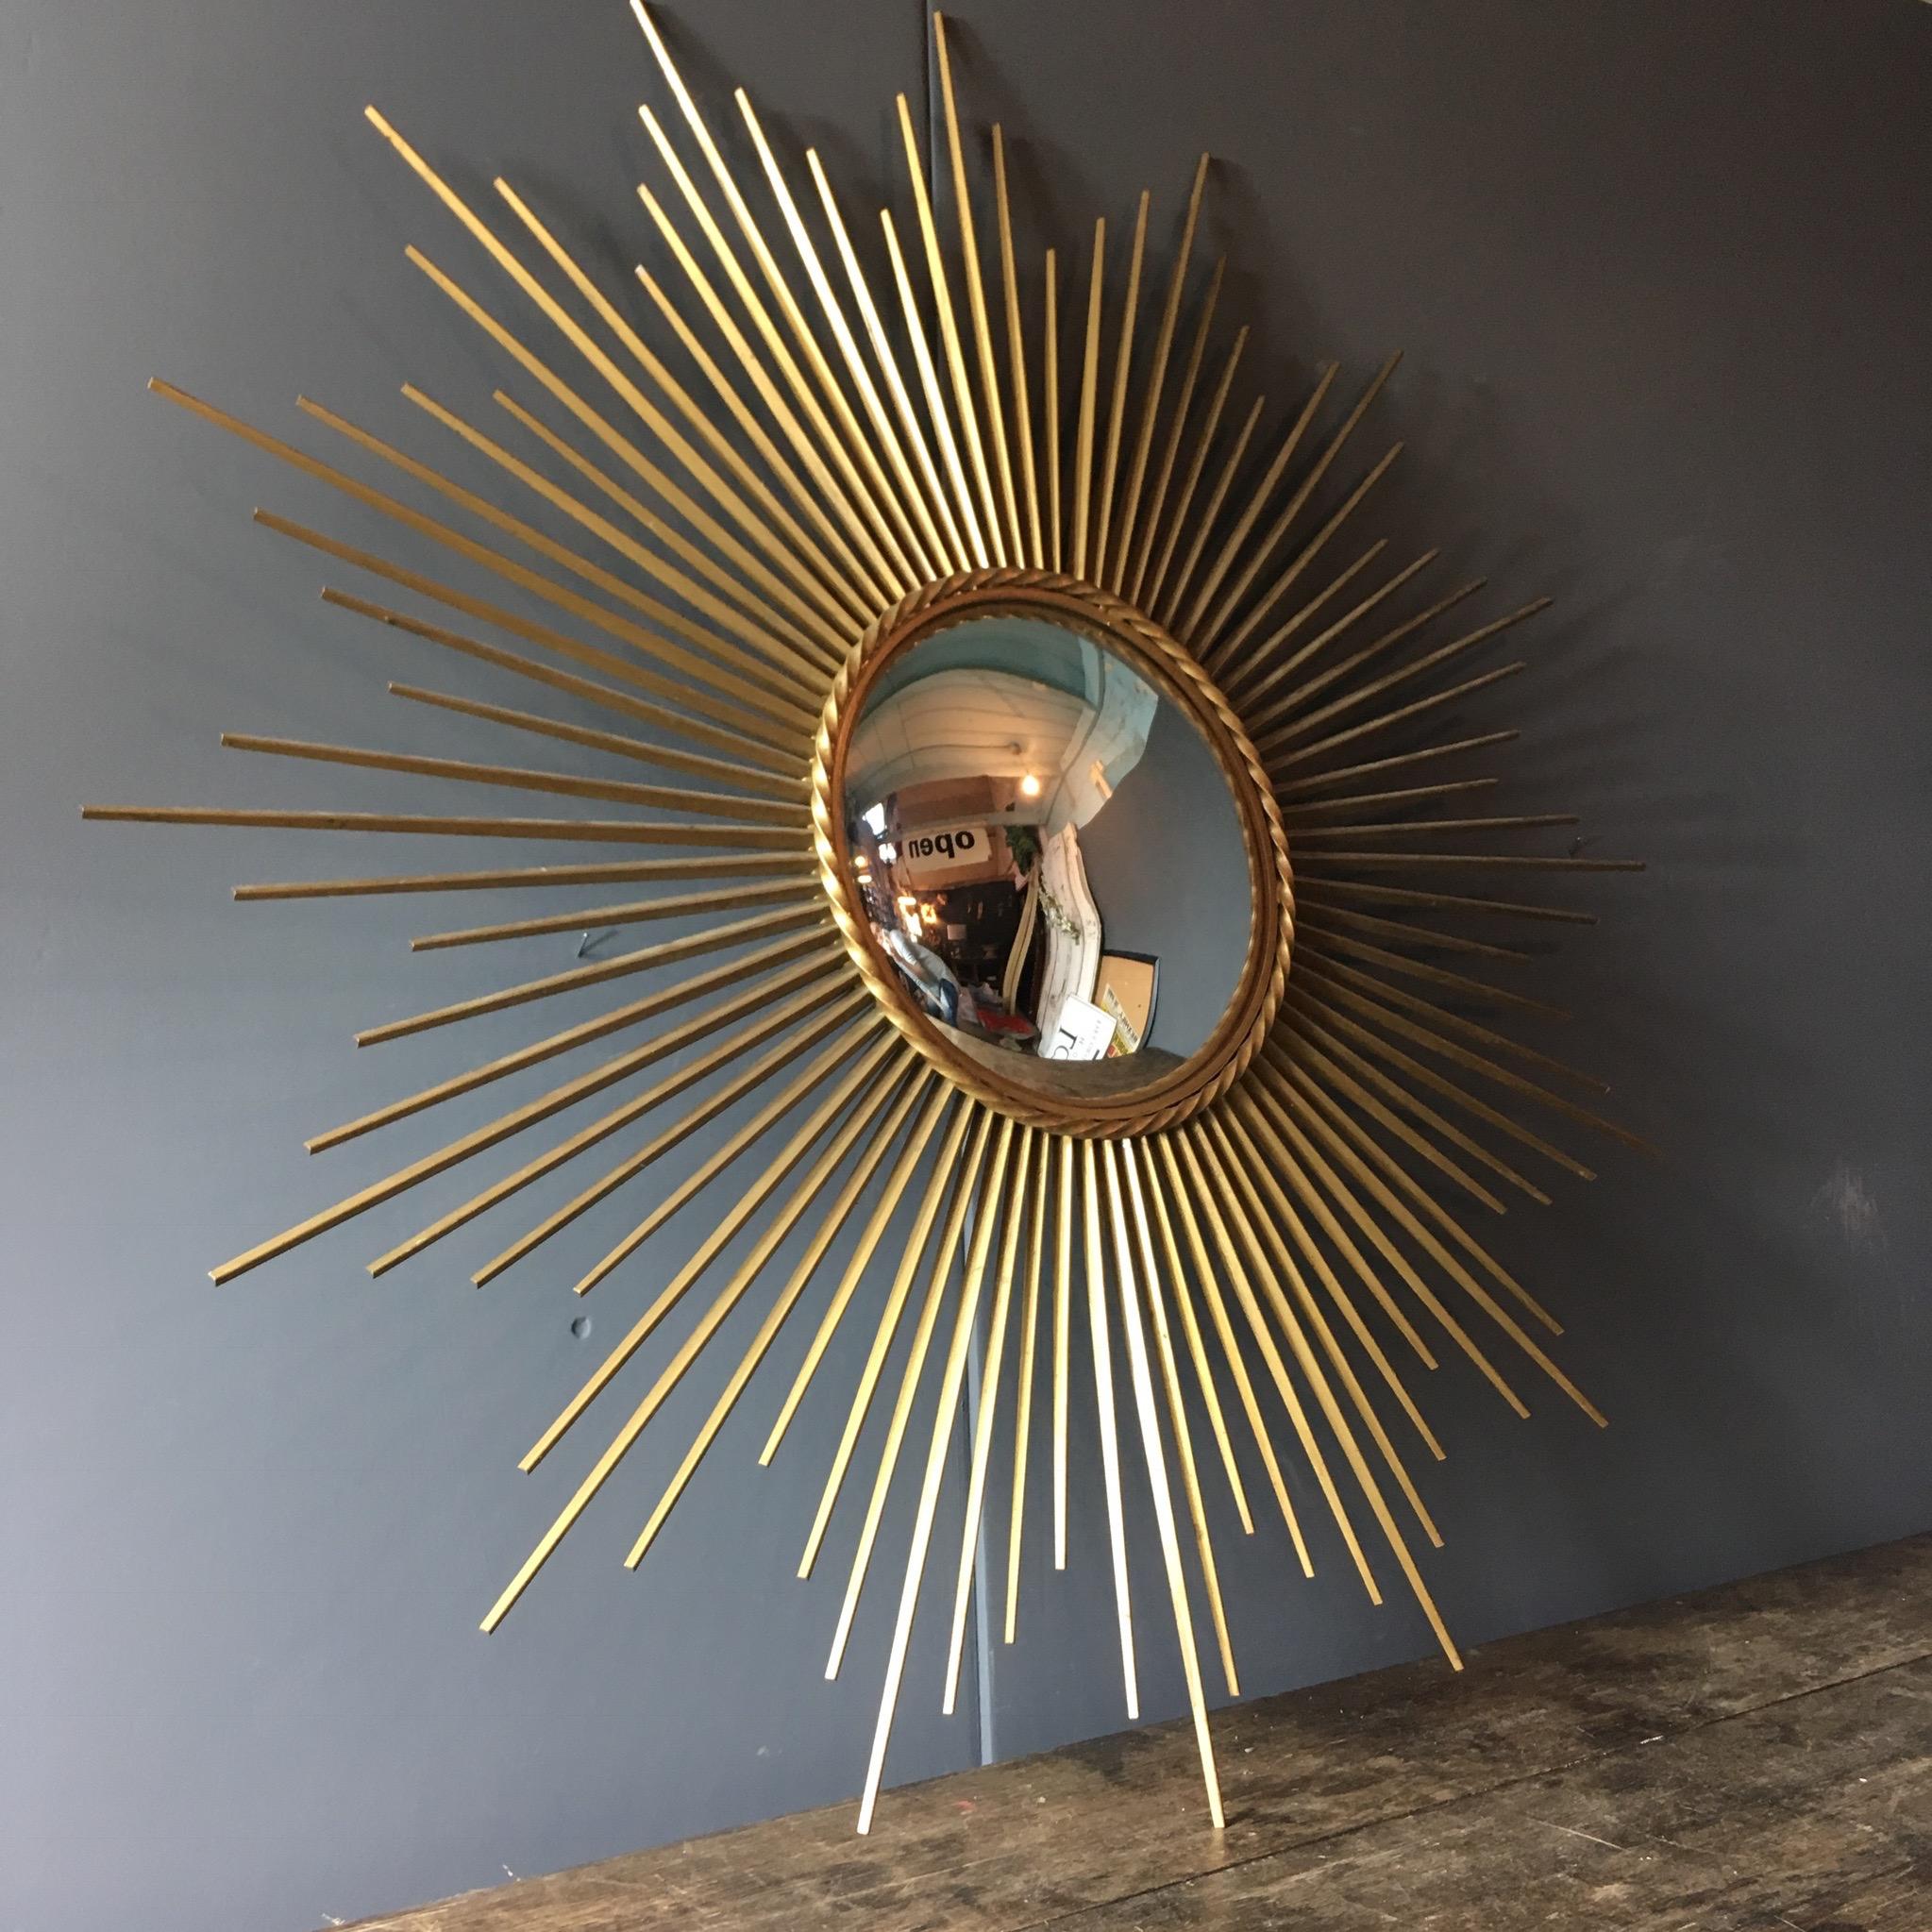 Chaty Vallauris French sunburst mirror

Convex mirror

Gilt metal with twist detail around the mirror 

Stamped with 'Chaty Vallauris' on reverse

Total width 85 cm width
Mirror width 25cm

Hanging hook on reverse

One of the small